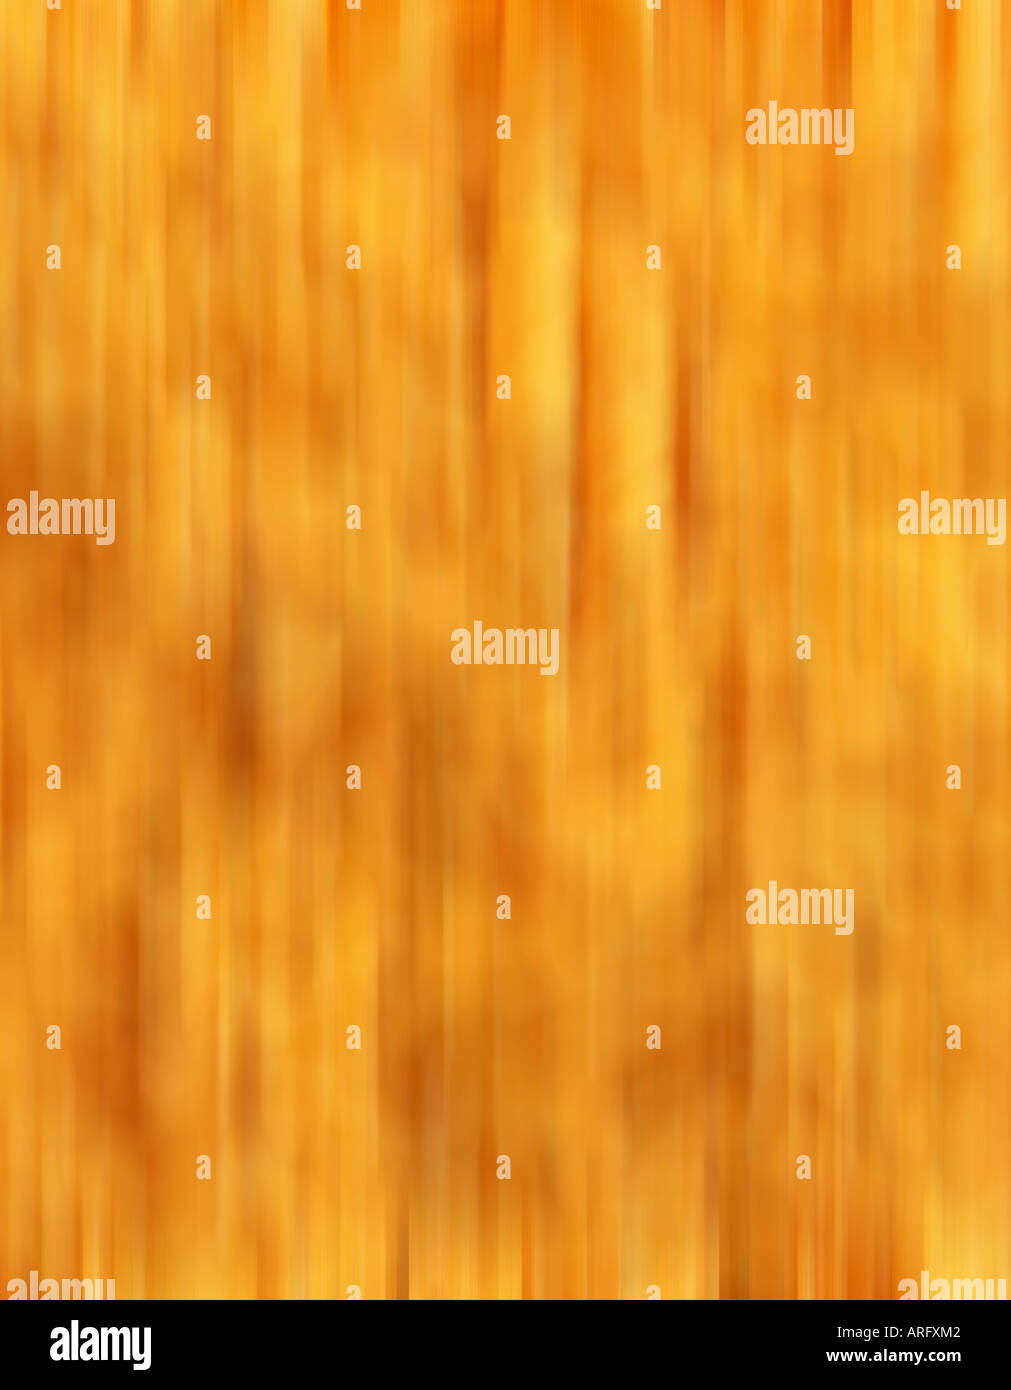 ABSTRACT YELLOW BACKGROUND WITH RANDOM LINEAR BLUR Stock Photo